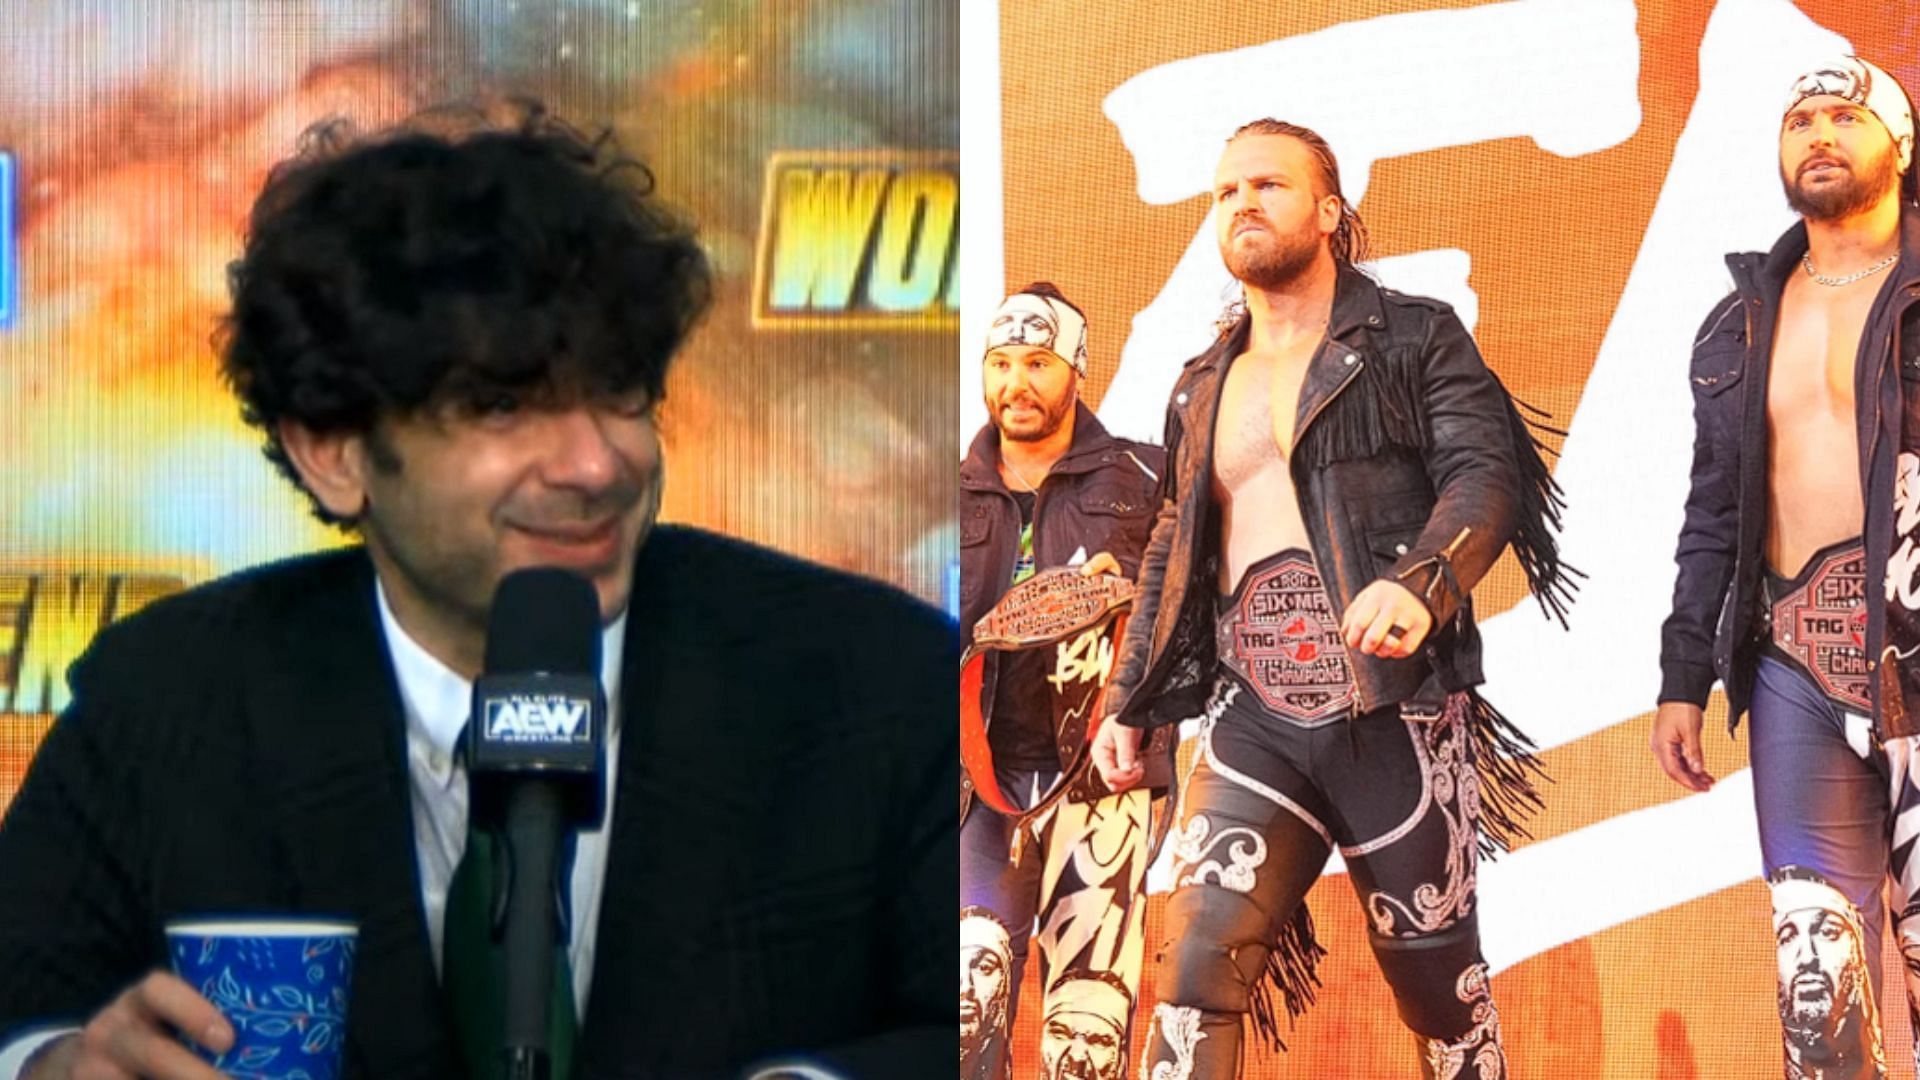 Tony Khan and The Elite are major names in AEW